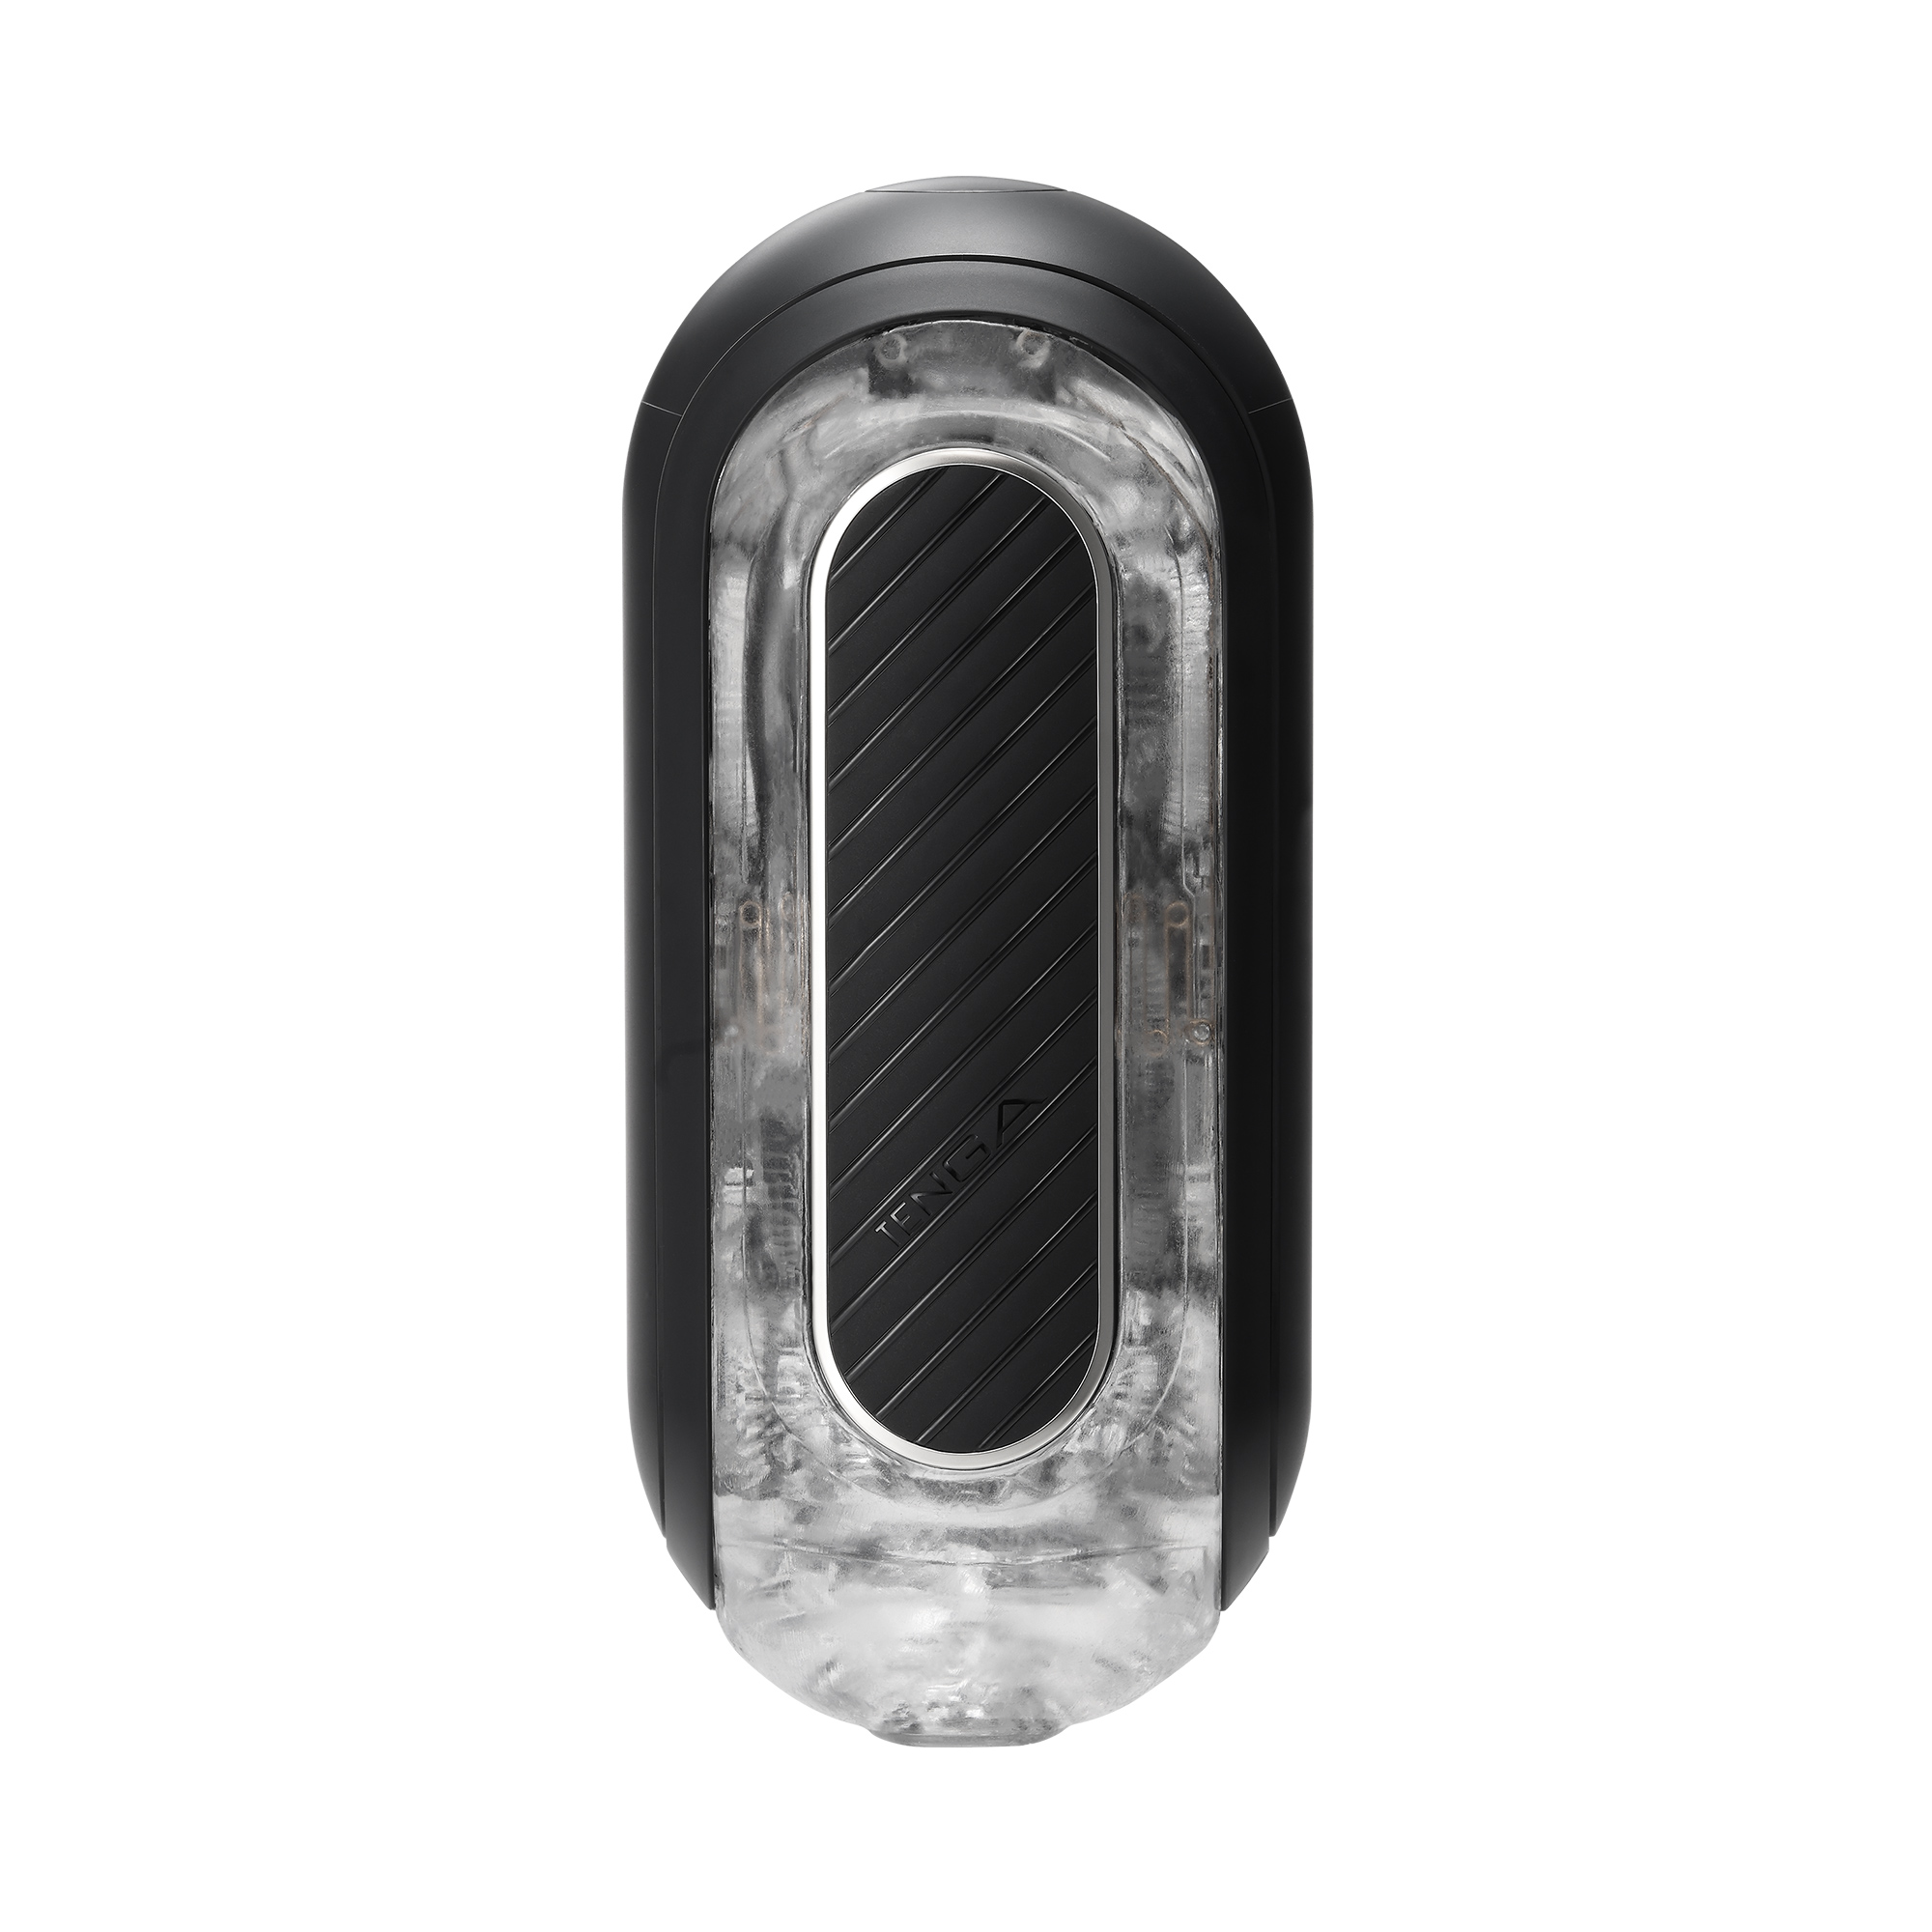 Take your masturbation sessions to a new level with the Tenga Flip Zero Gravity with Electronic Vibration! The Tenga Black is designed with a firm